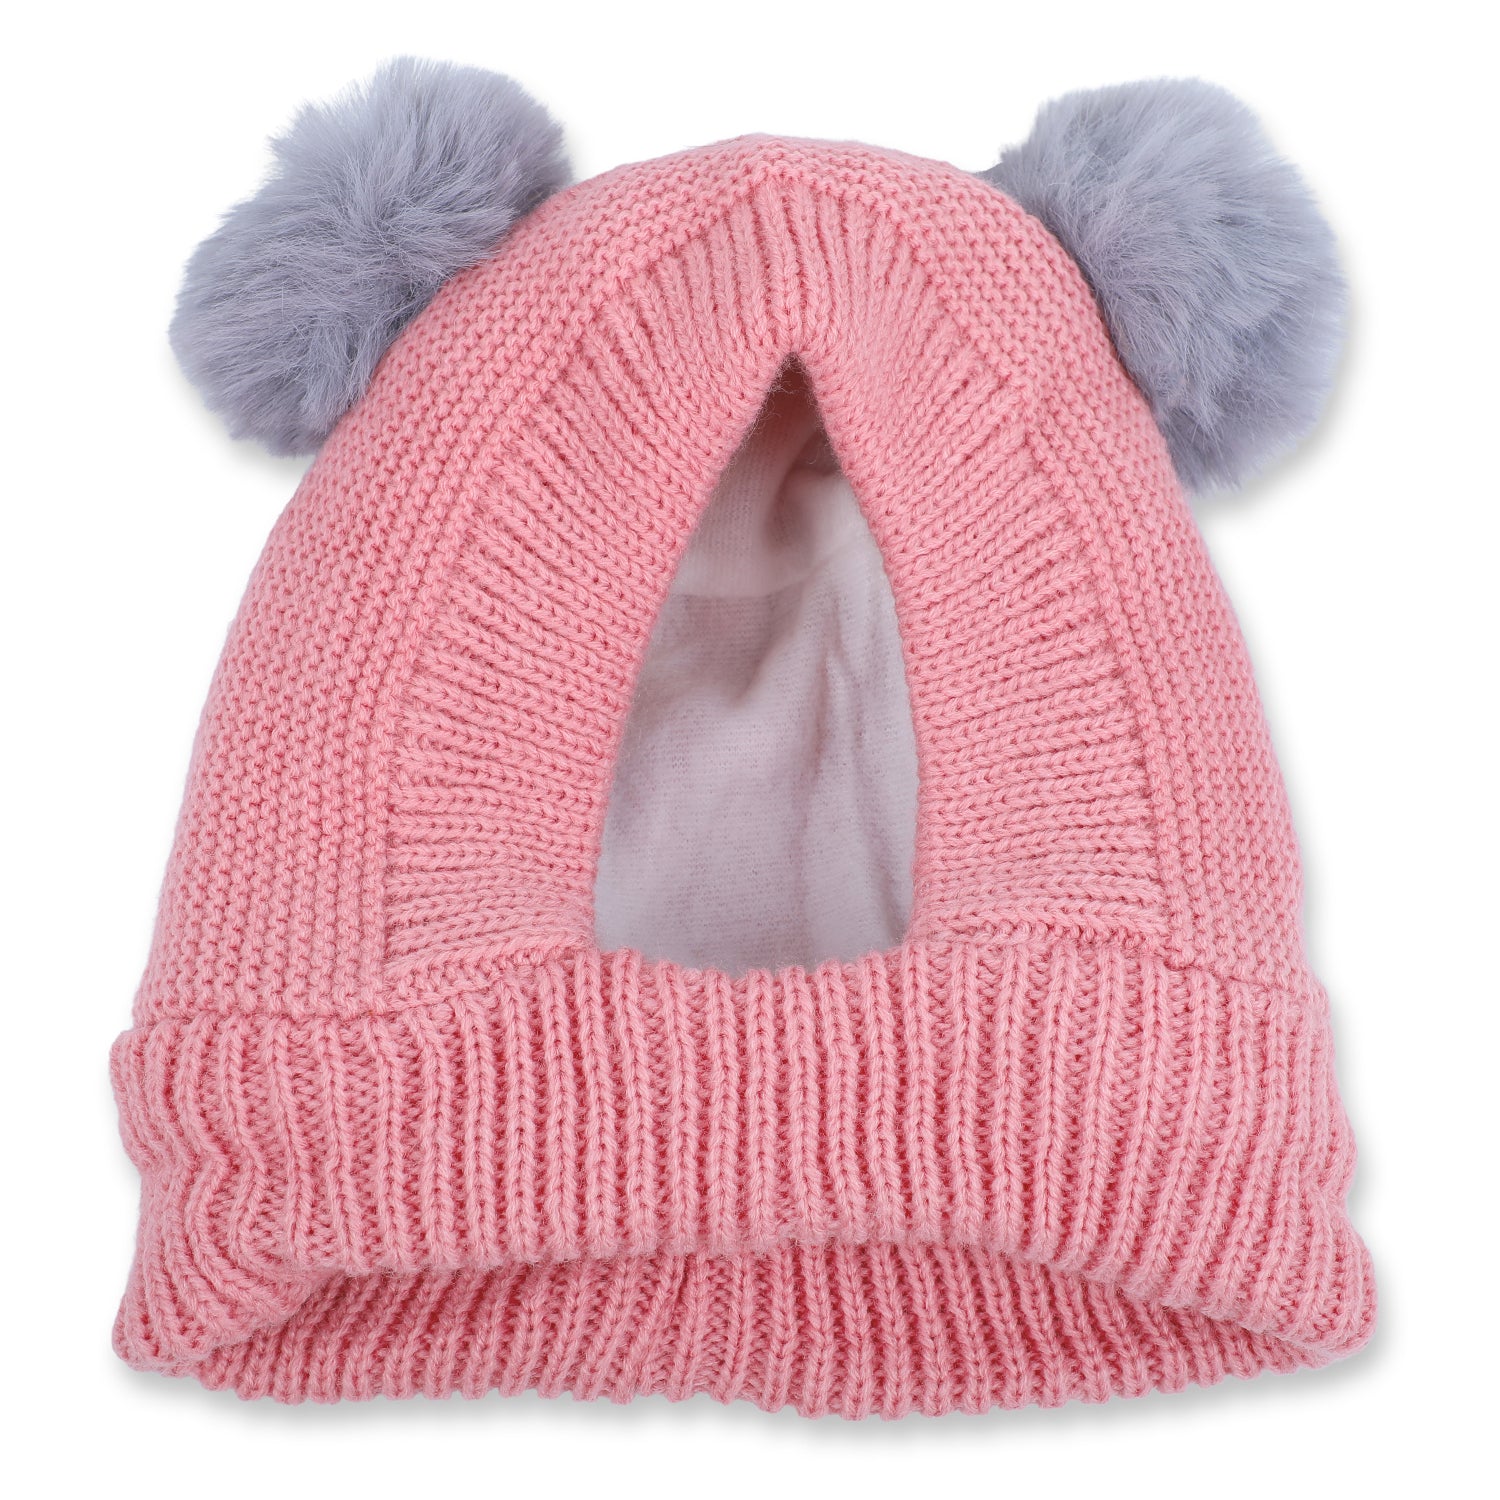 Baby Moo Adorable Pom Pom Knitted Beanie Woollen Cap - Peach - Baby Moo